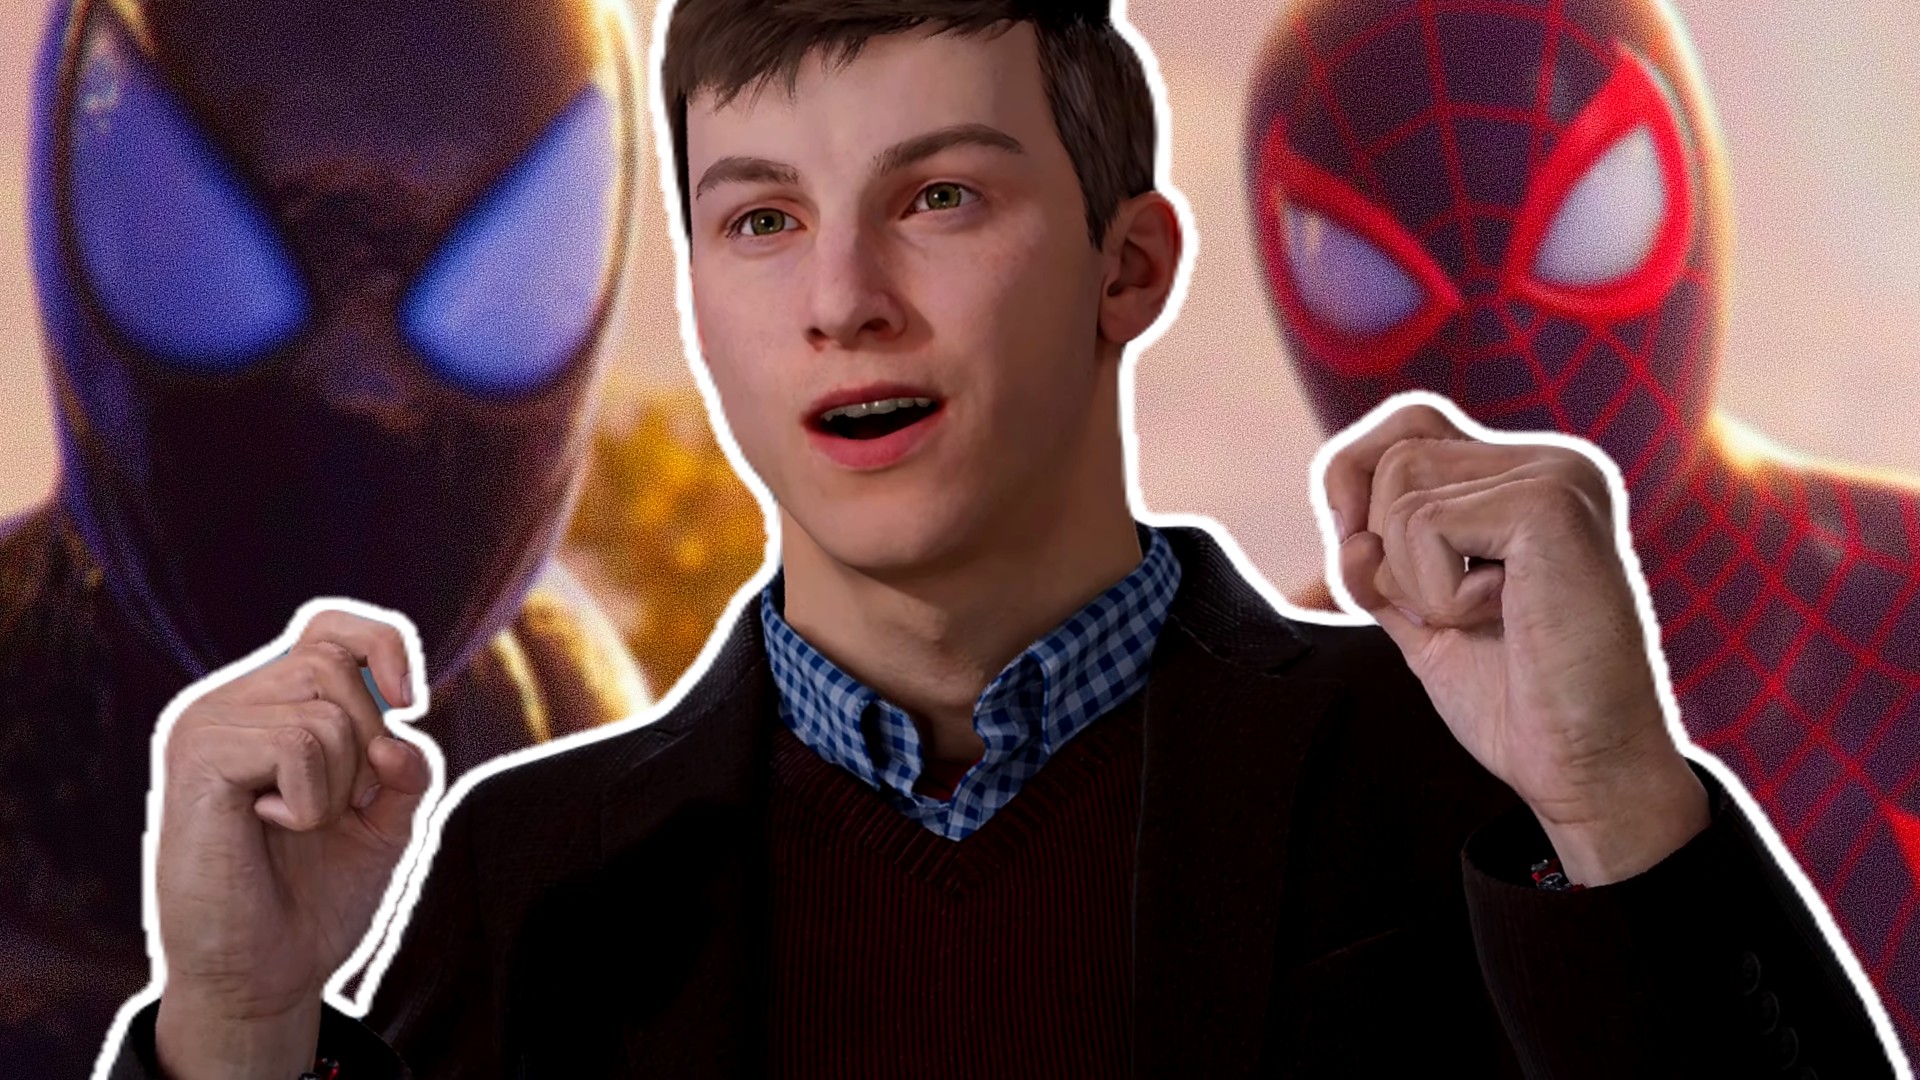 Marvel's Spider-Man 2 sold over 2.5 million copies in 24 hours